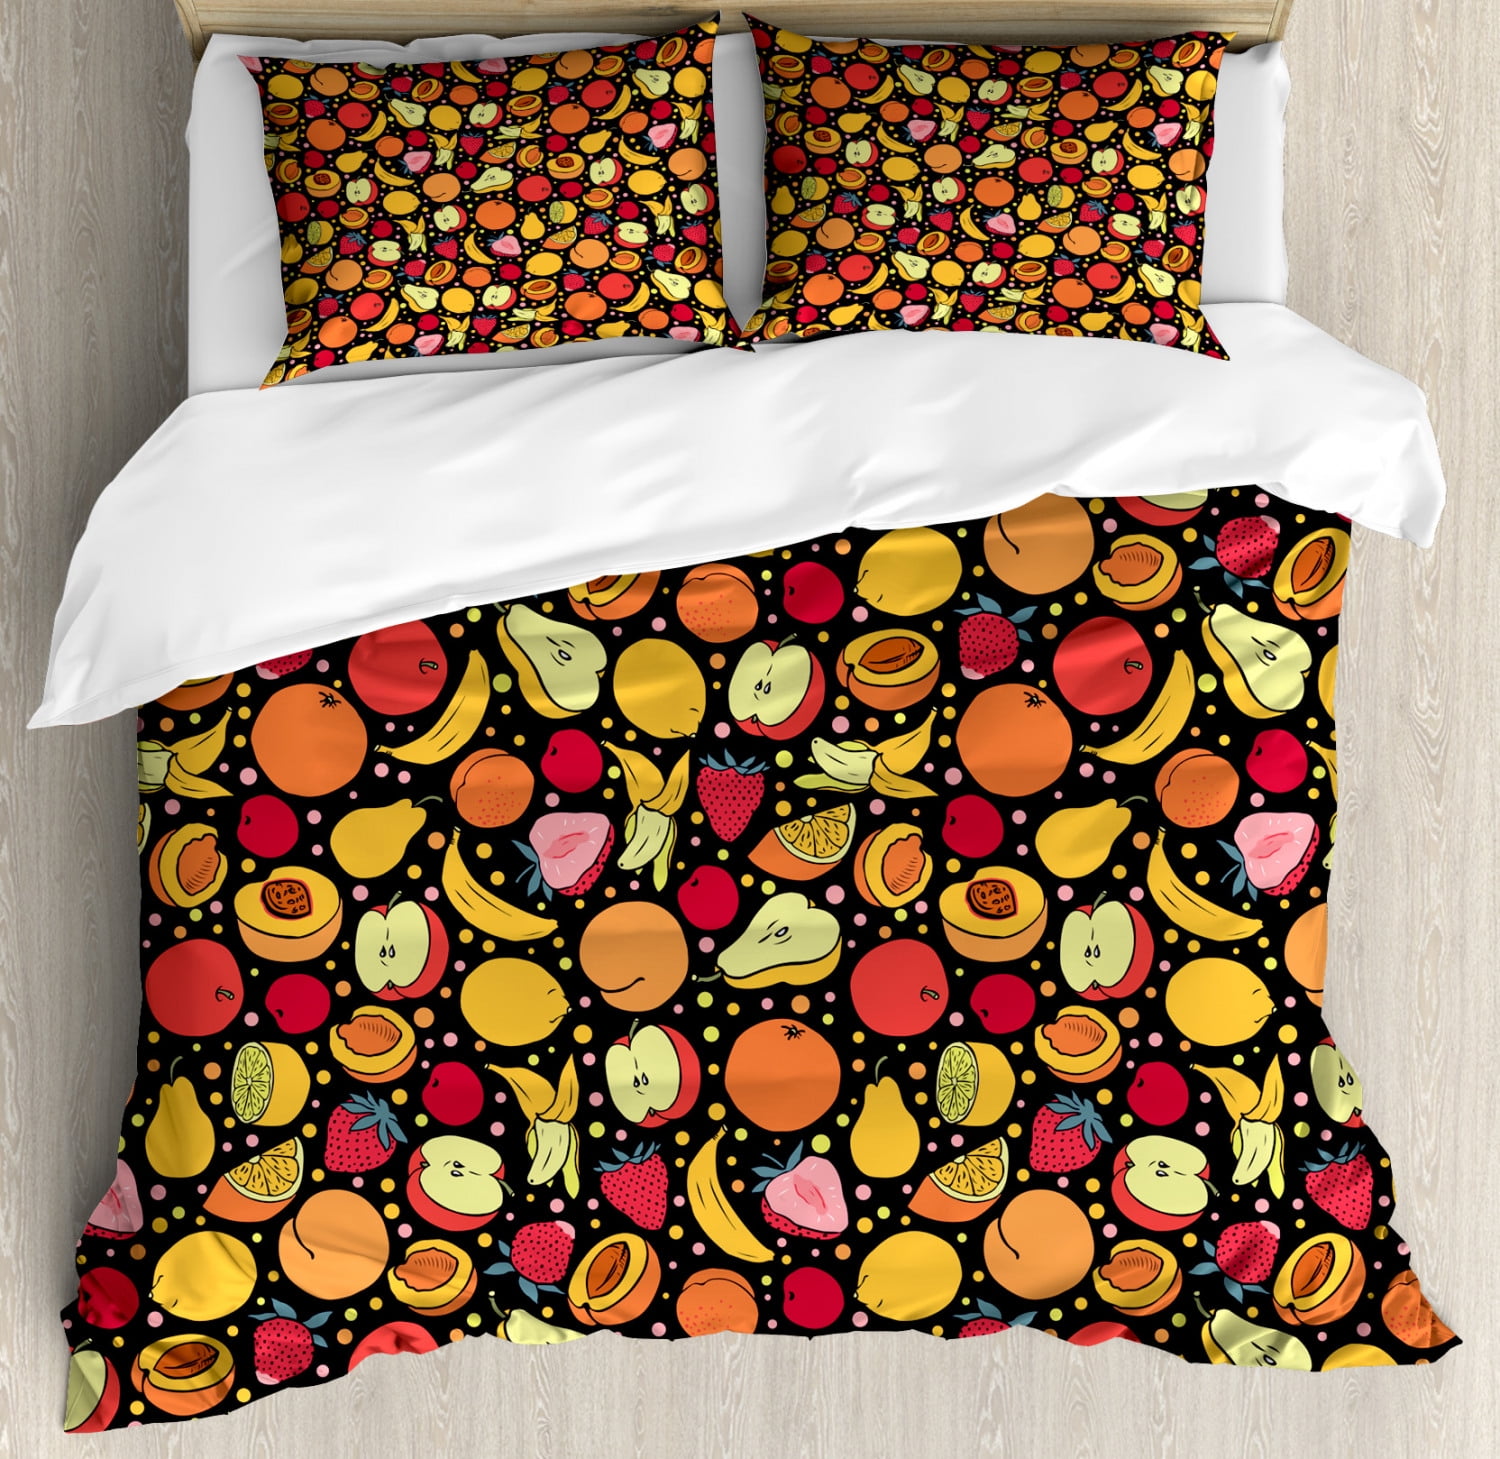 Vegan Duvet Cover Set King Size Pattern With Colorful Tasty